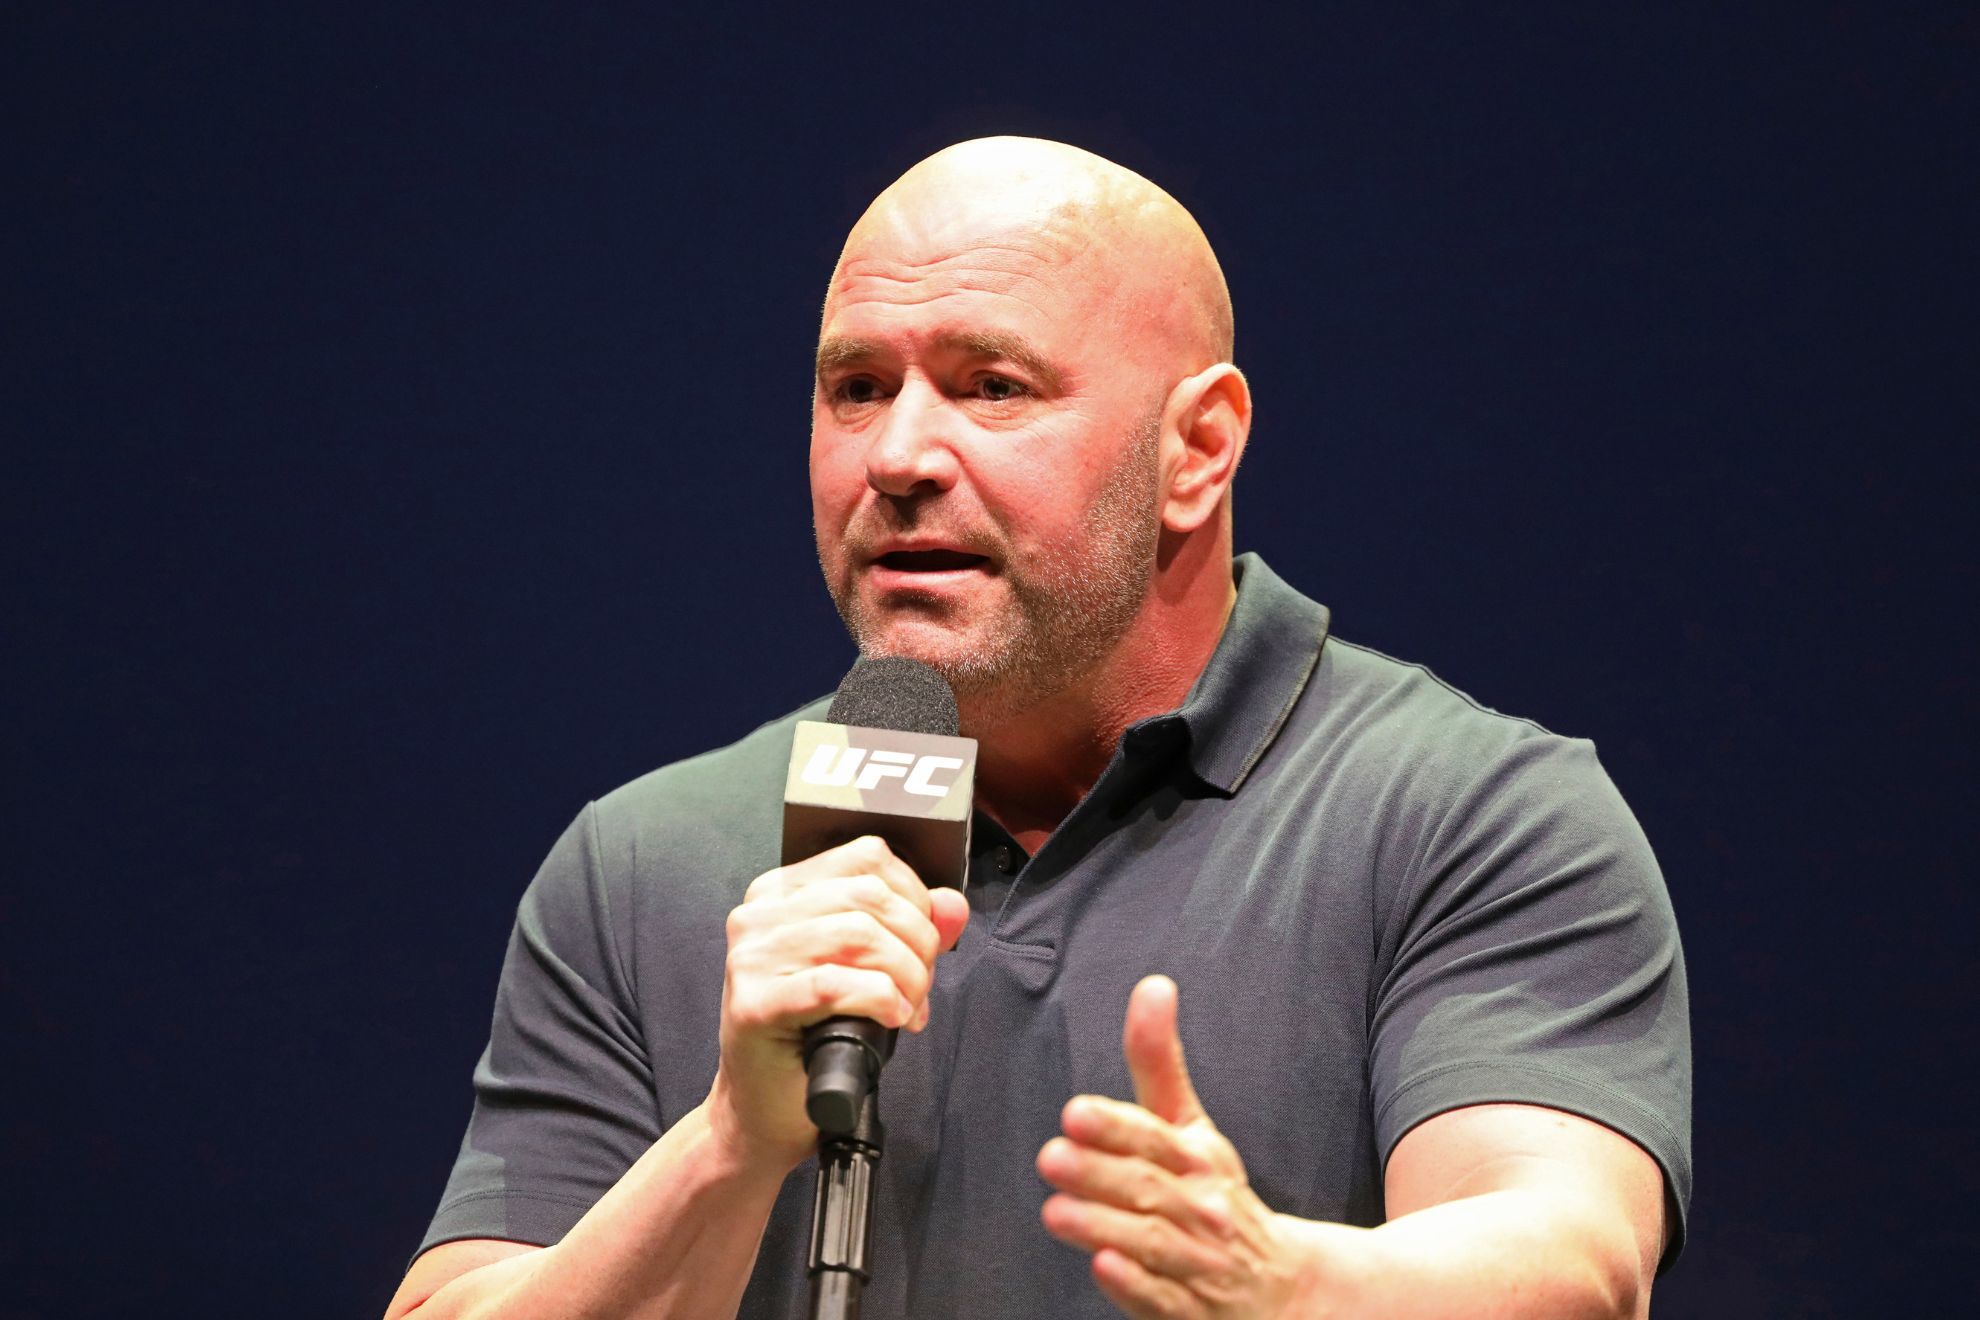 Dana White calls out Mexico City security for not stopping brawl between fans